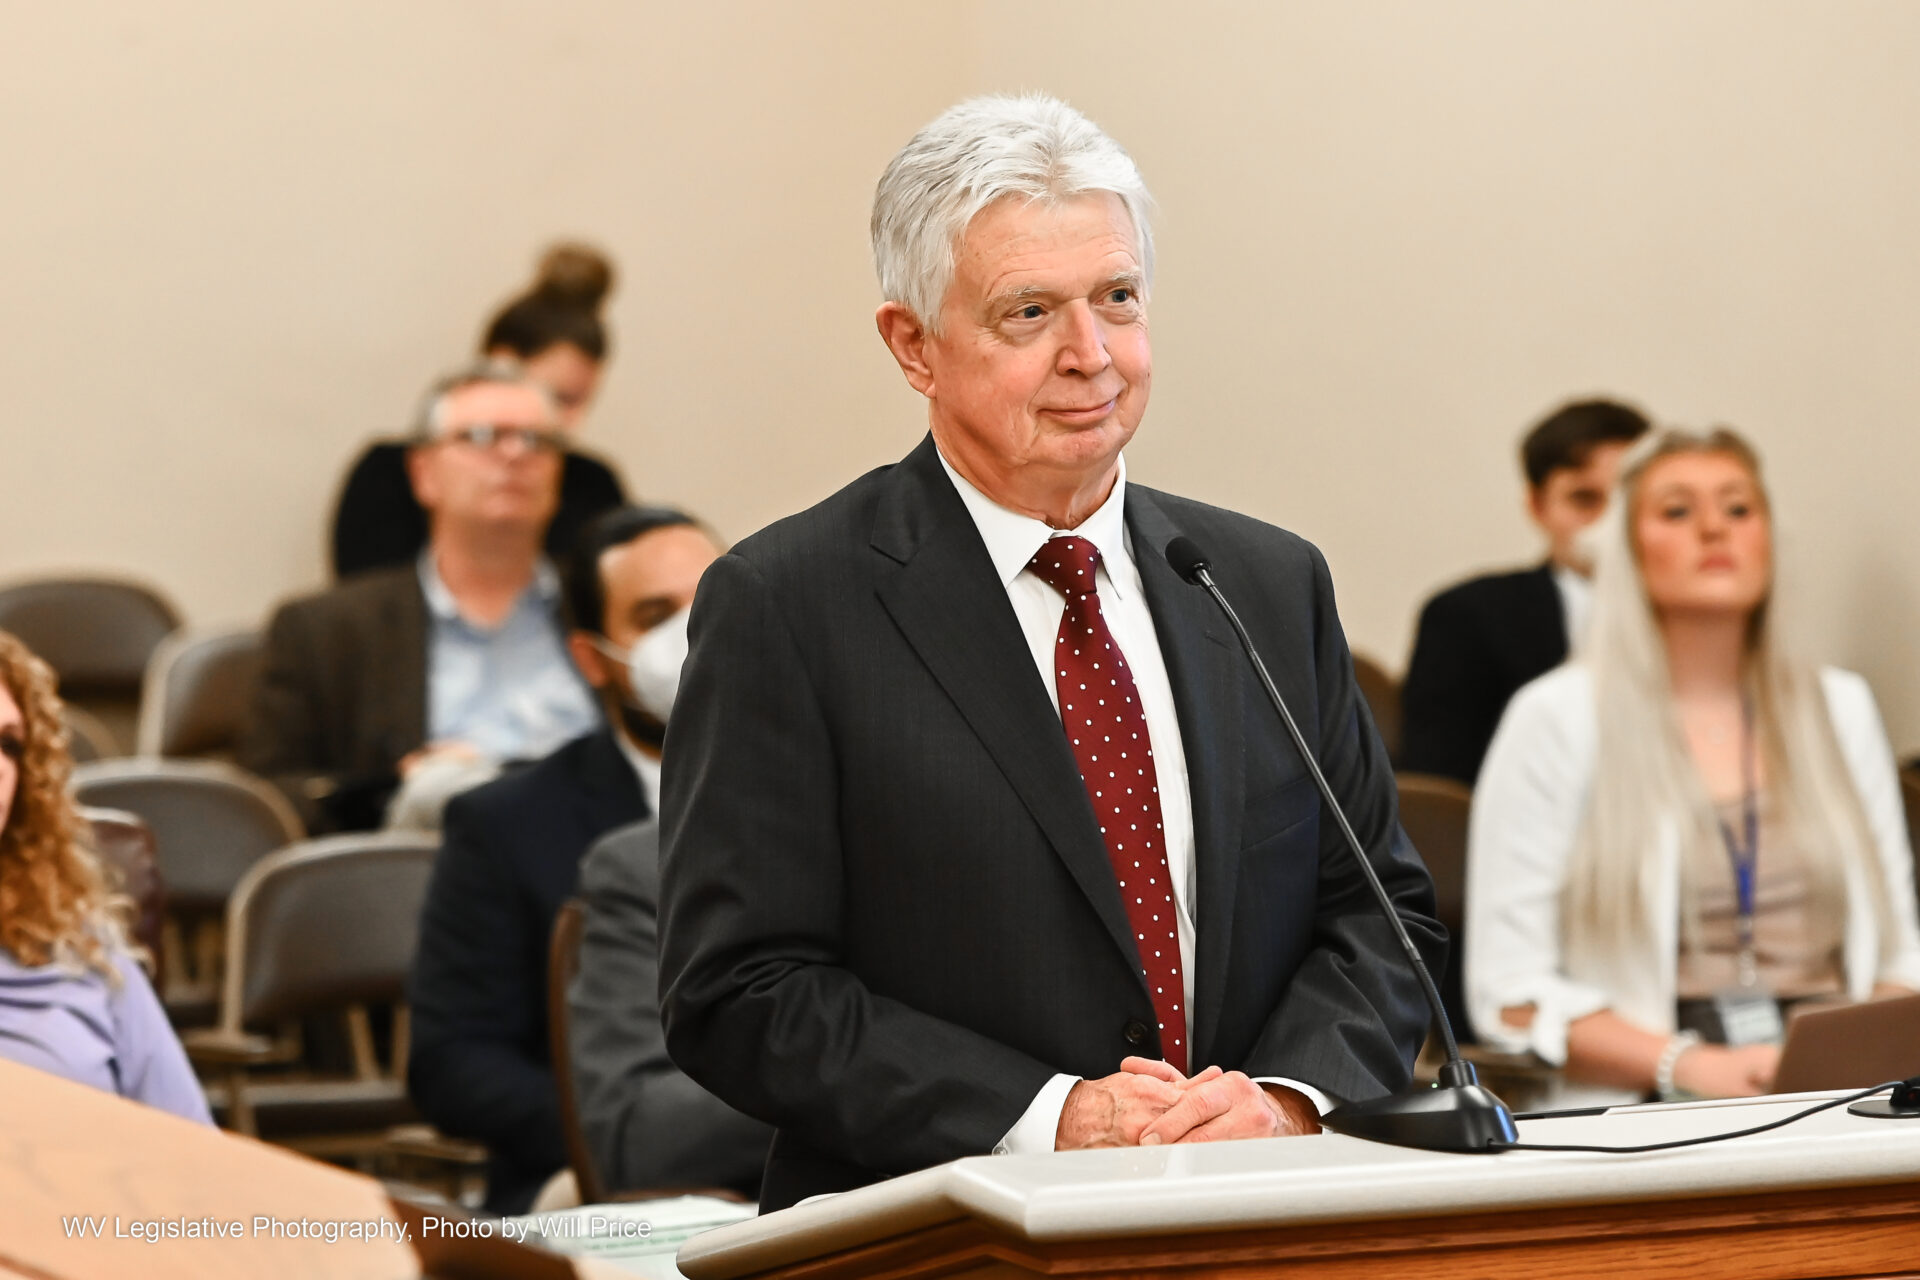 Superintendent David Roach stands at a lectern while speaking to the Senate Committee on Education in early 2023. He wears a black suit over a white shirt and red tie. Behind him is arrayed the gallery of the meeting chambers.